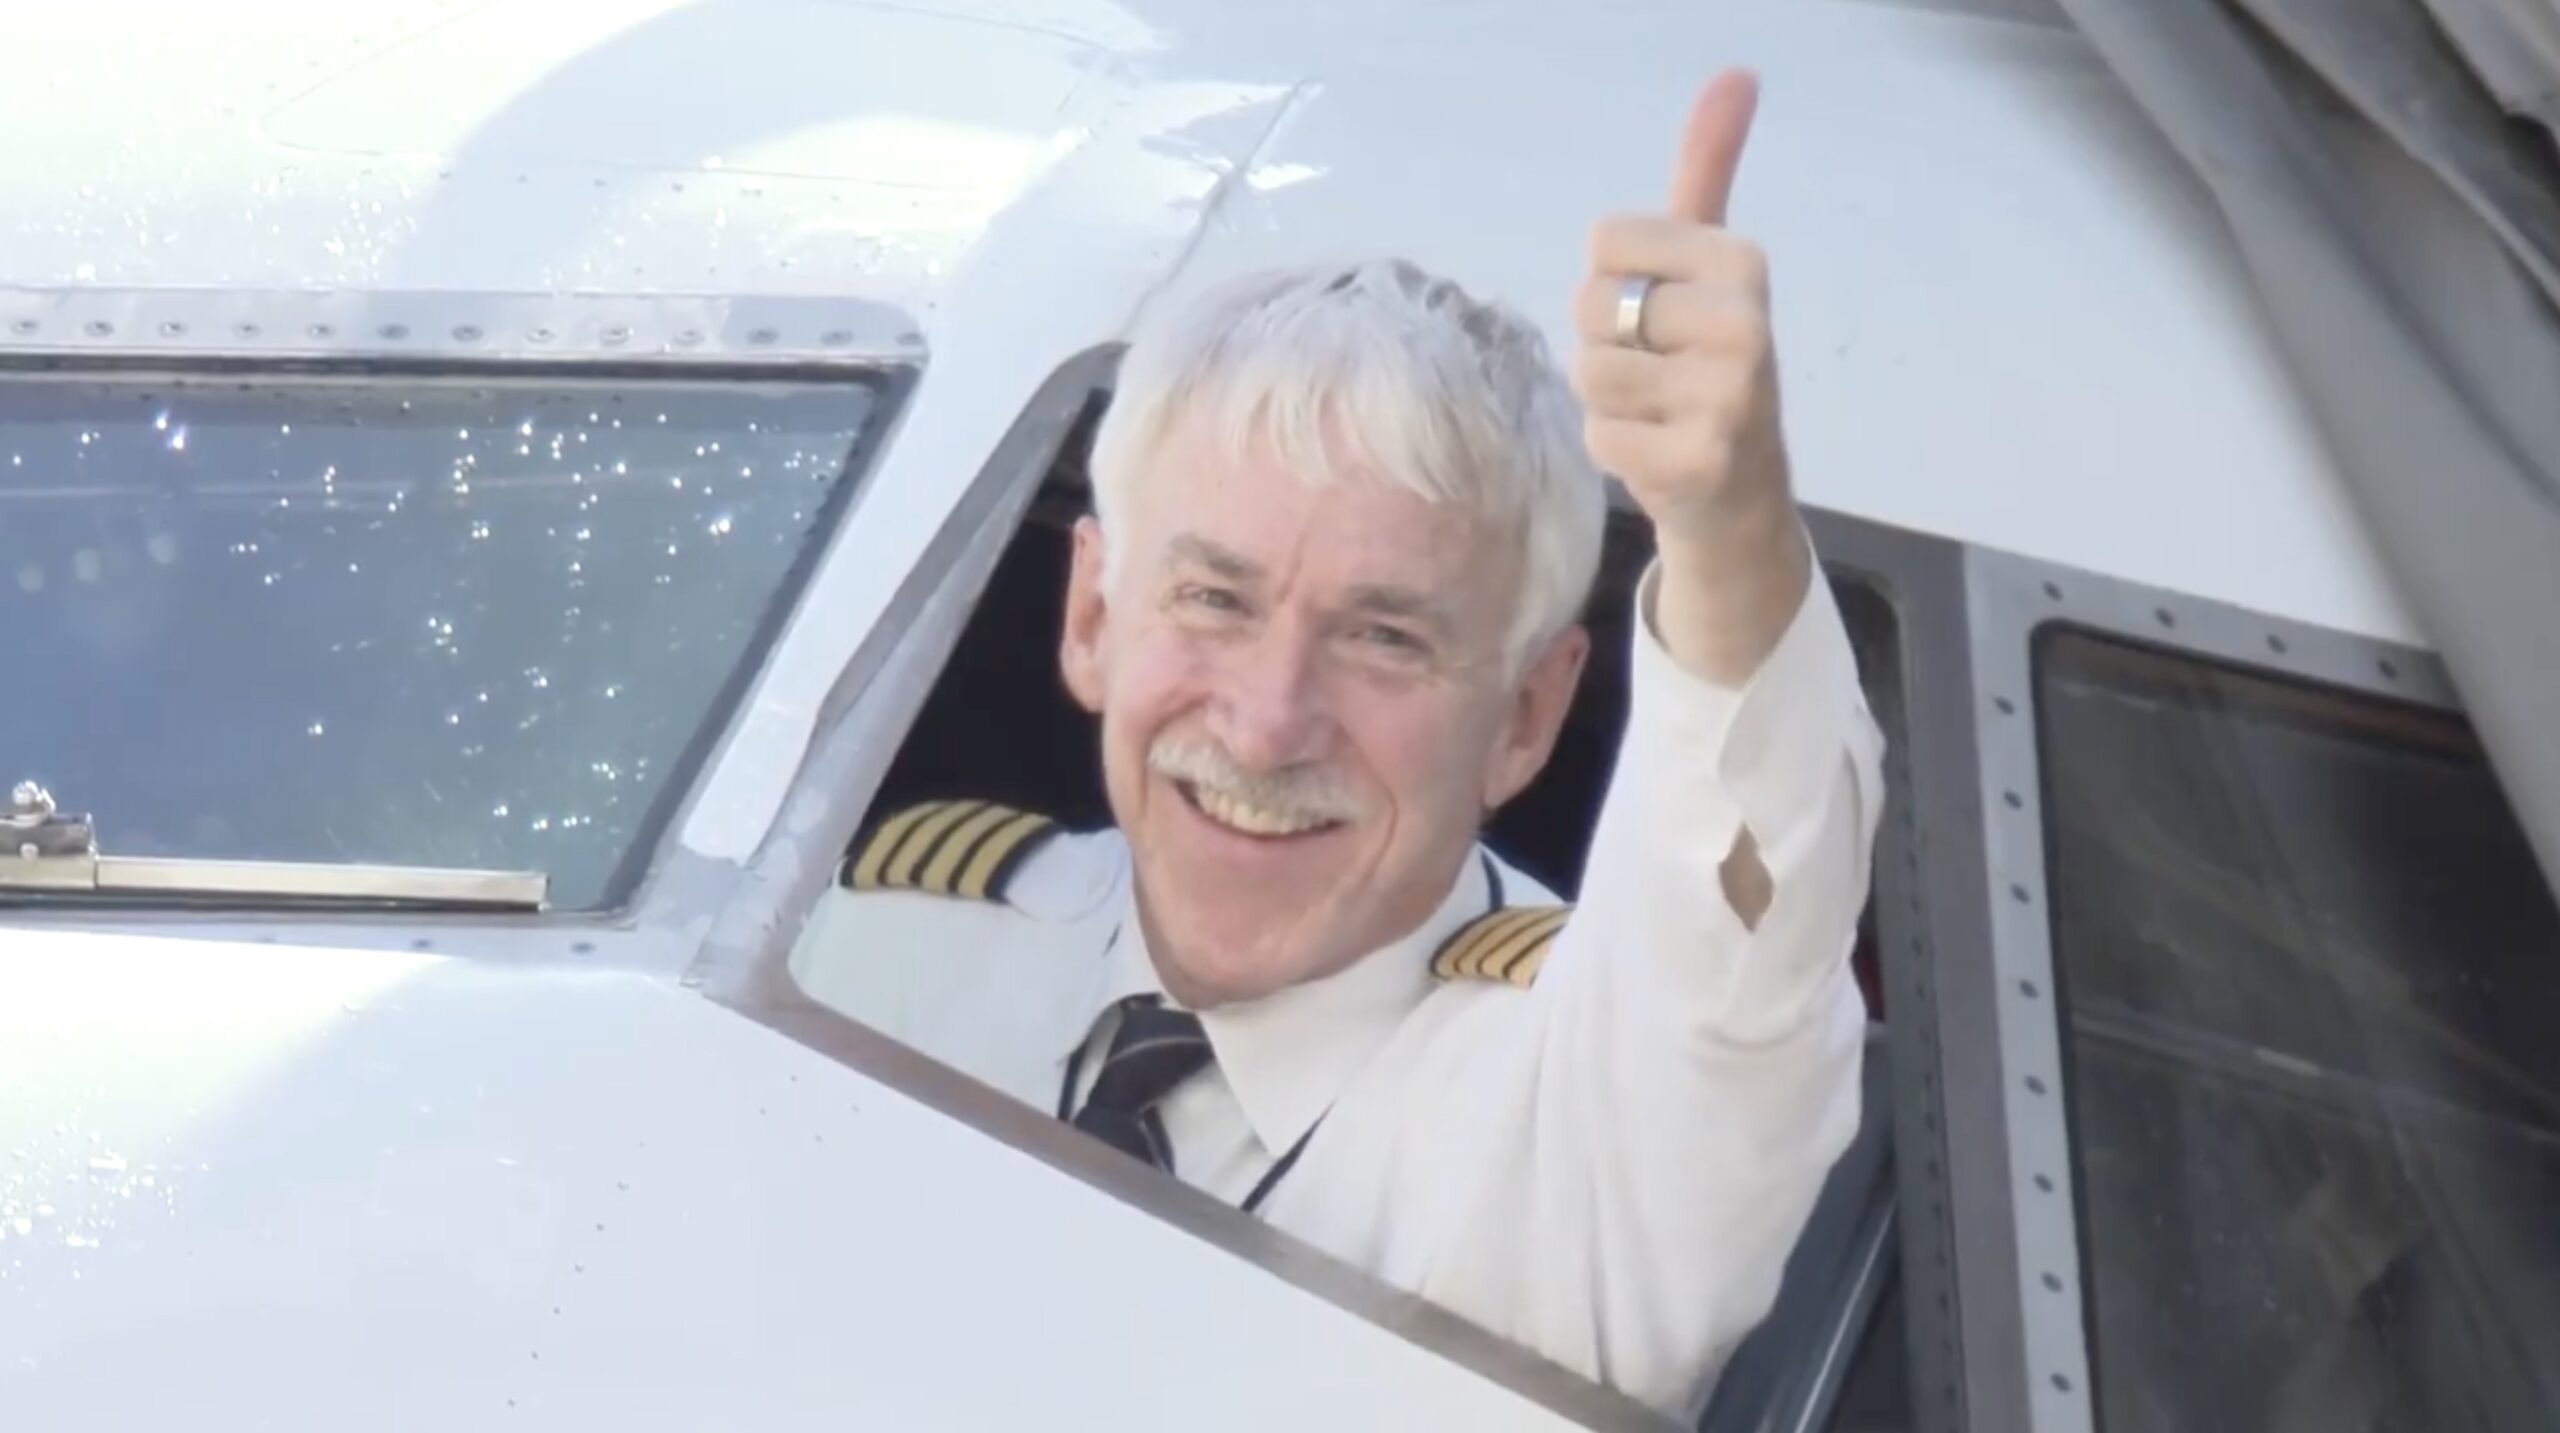 a man in uniform waving and smiling